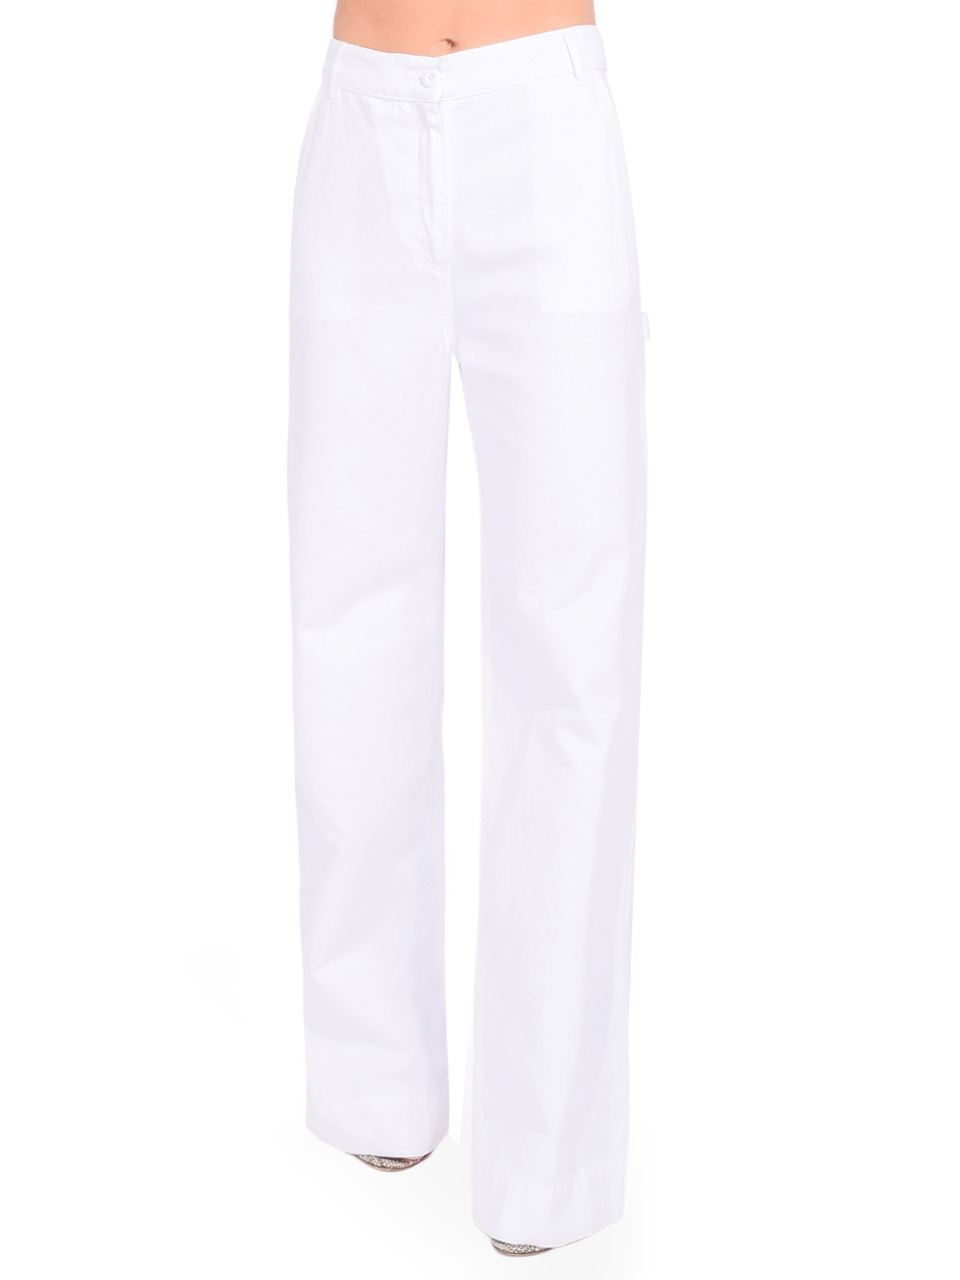 LE SUPERBE Kraft Werk Pant in White Front View 